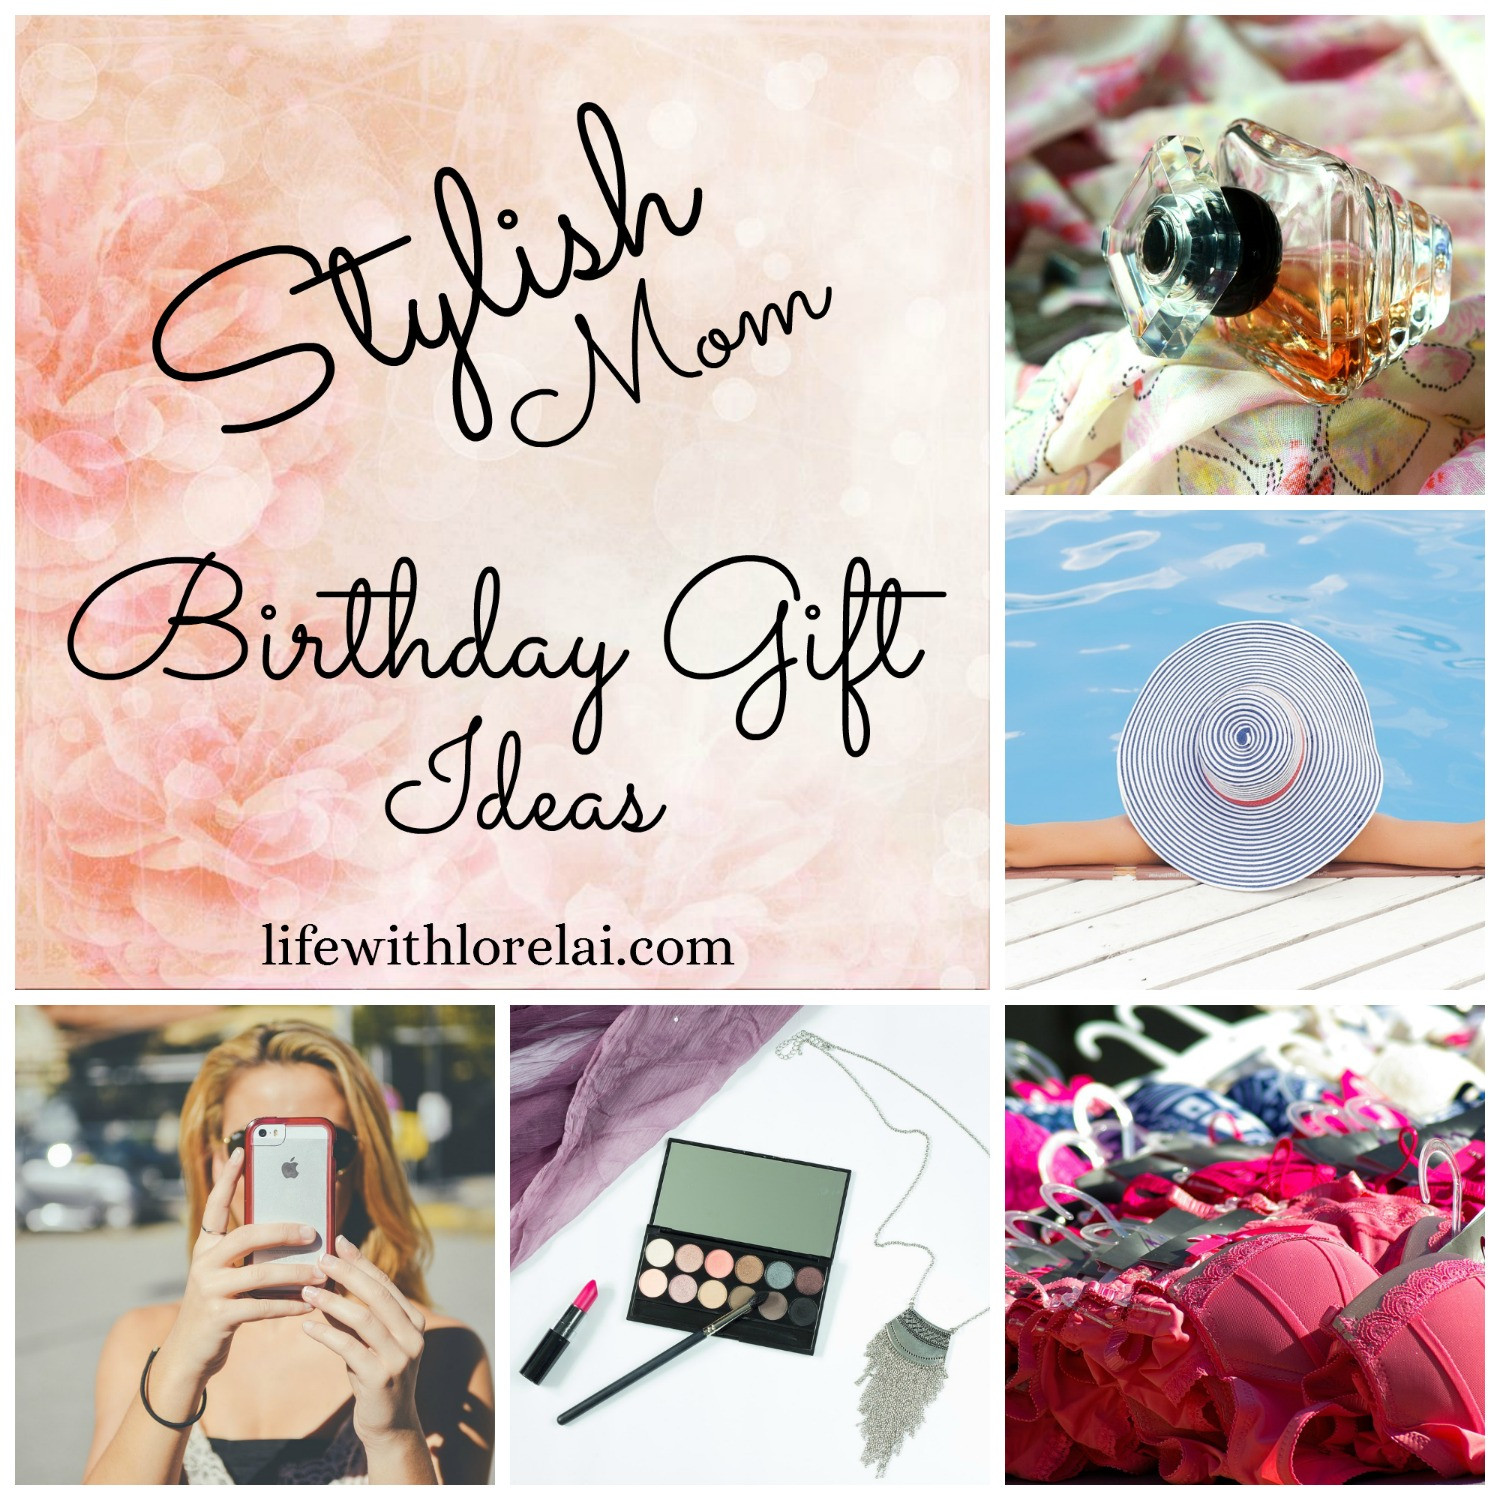 Birthday Gift Ideas For New Moms
 Birthday Gift Ideas For The Stylish Mom Life With Lorelai